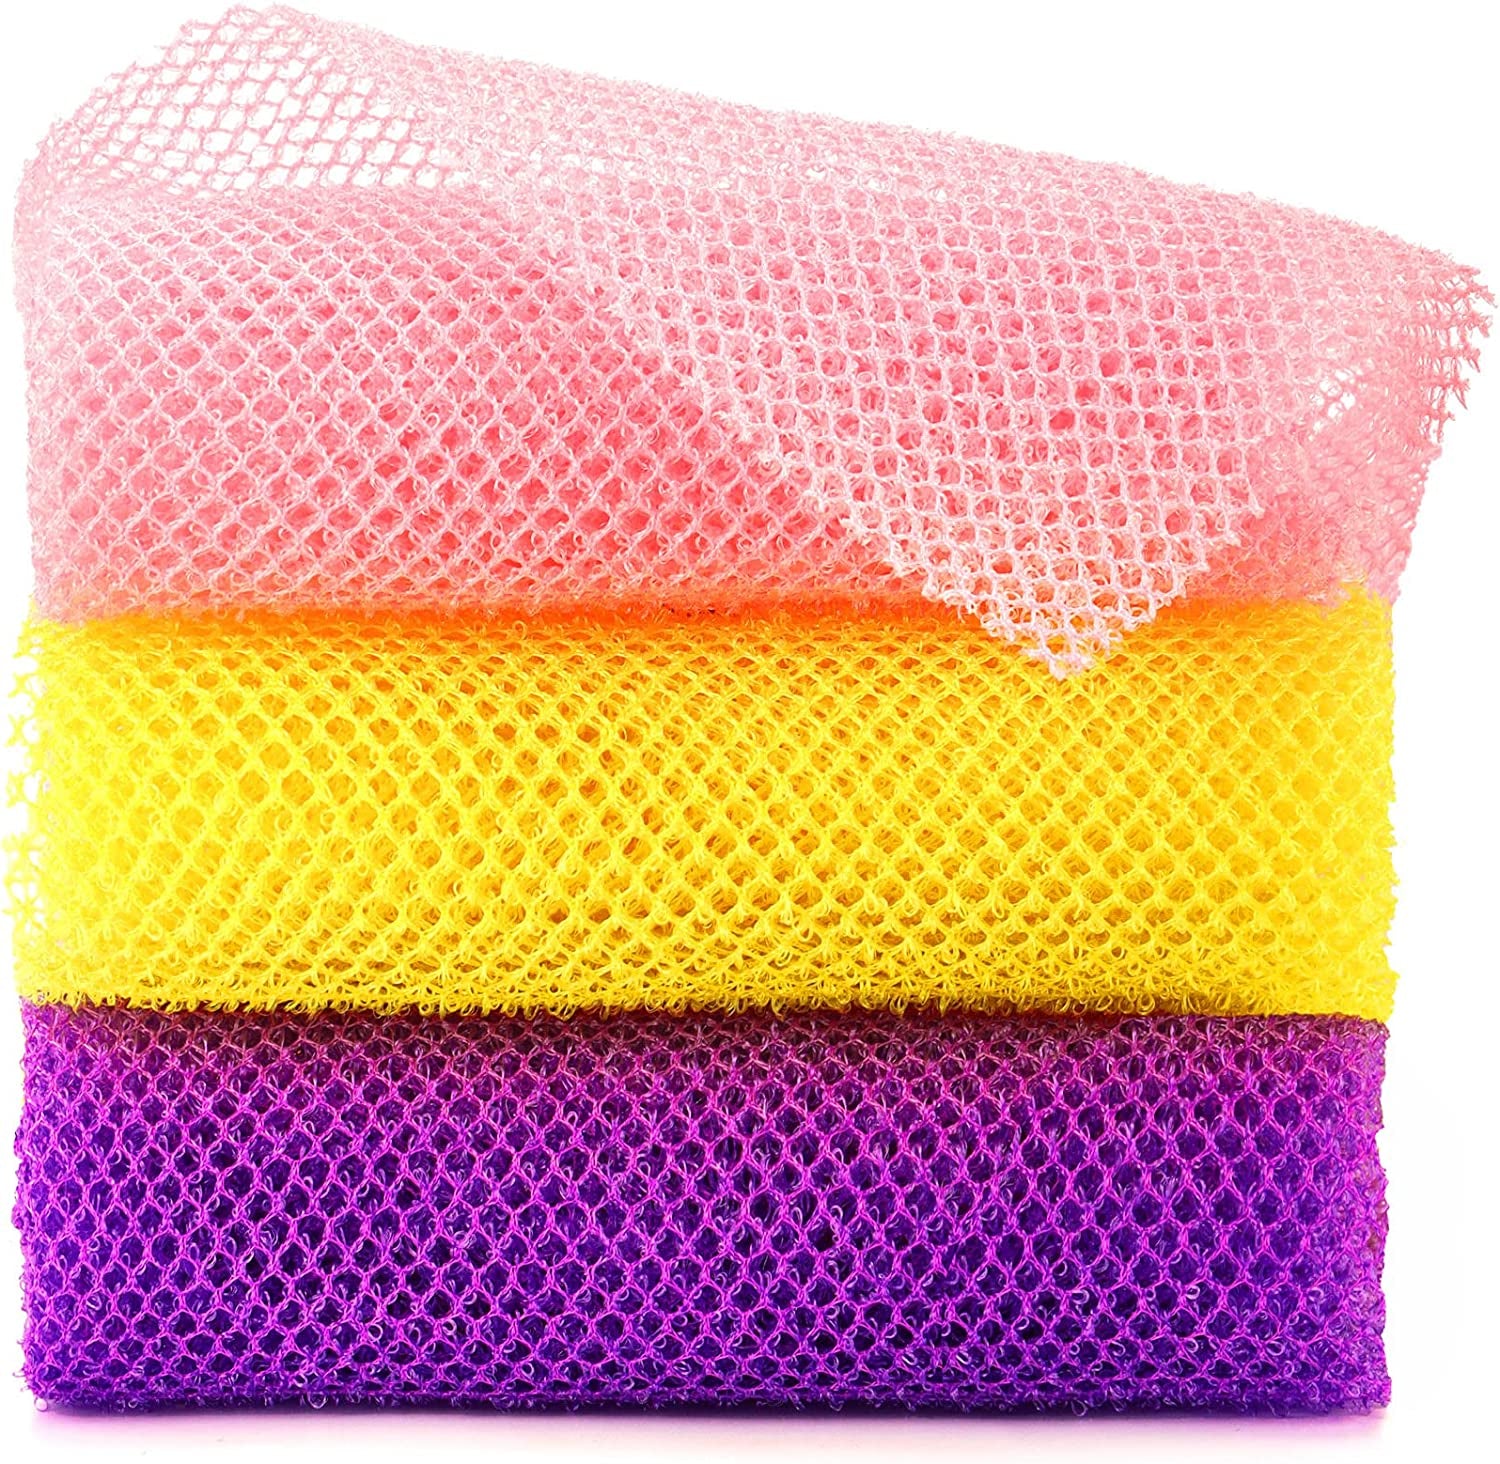 3 Pieces African Bath Sponge African Net Long Net Bath Sponge Exfoliating Shower Body Scrubber Back Scrubber Skin Smoother,Great for Daily Use (Pink,Yellow,Purple)